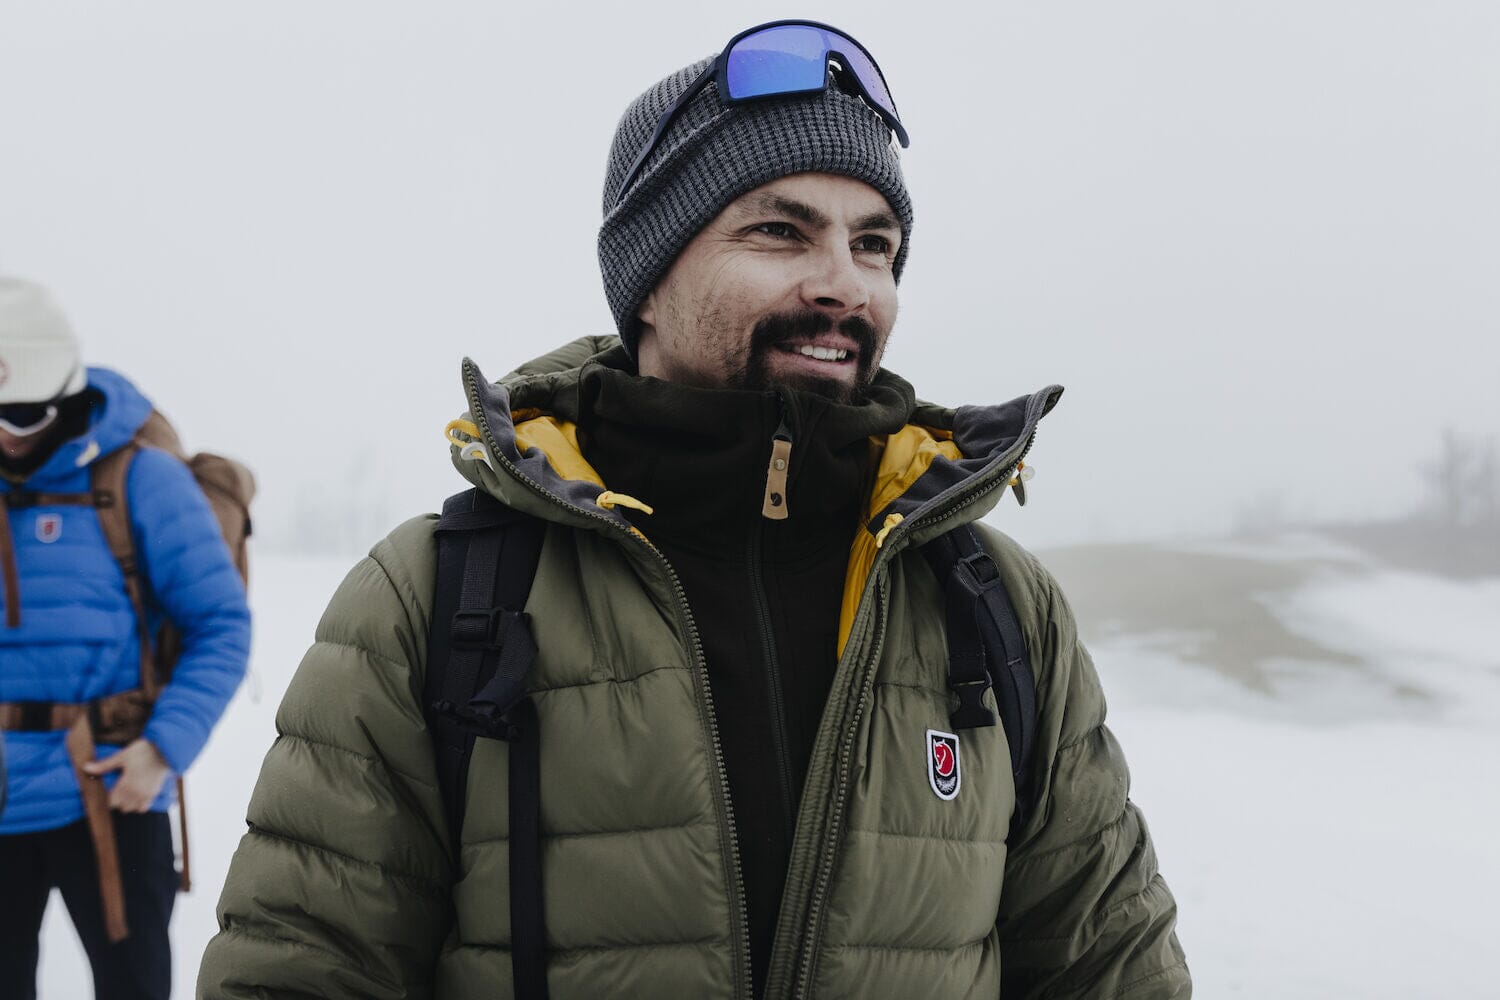 Fjällräven - M's Expedition Pack Down Hoodie - Recycled Nylon & Traceable Down - Weekendbee - sustainable sportswear